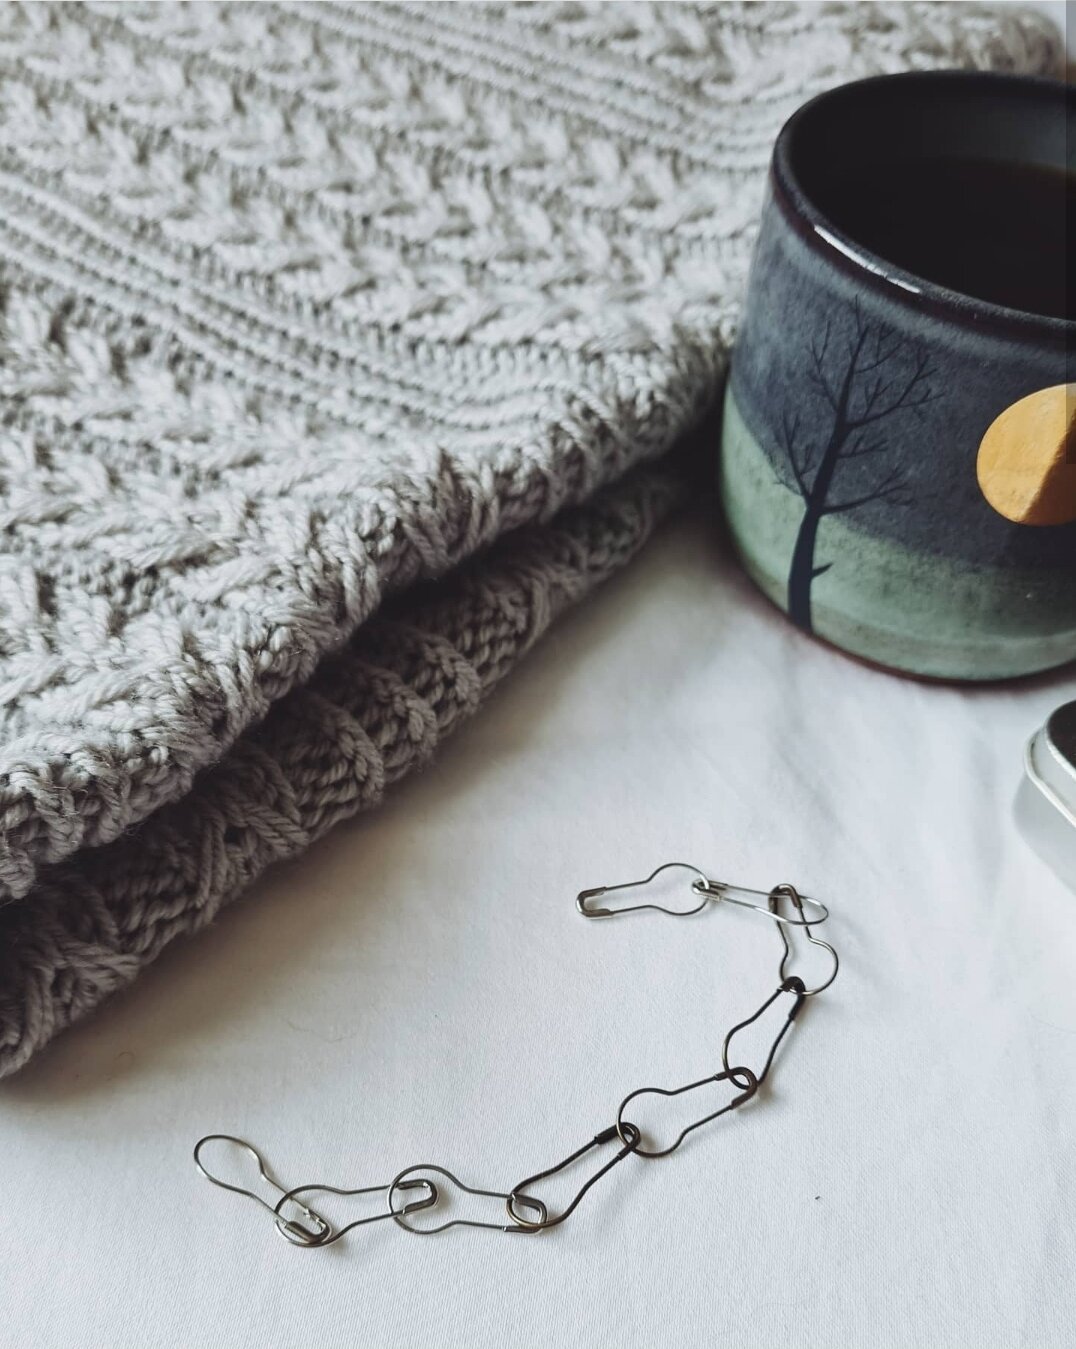 How to keep track of repeats in your knitting using bulb pins